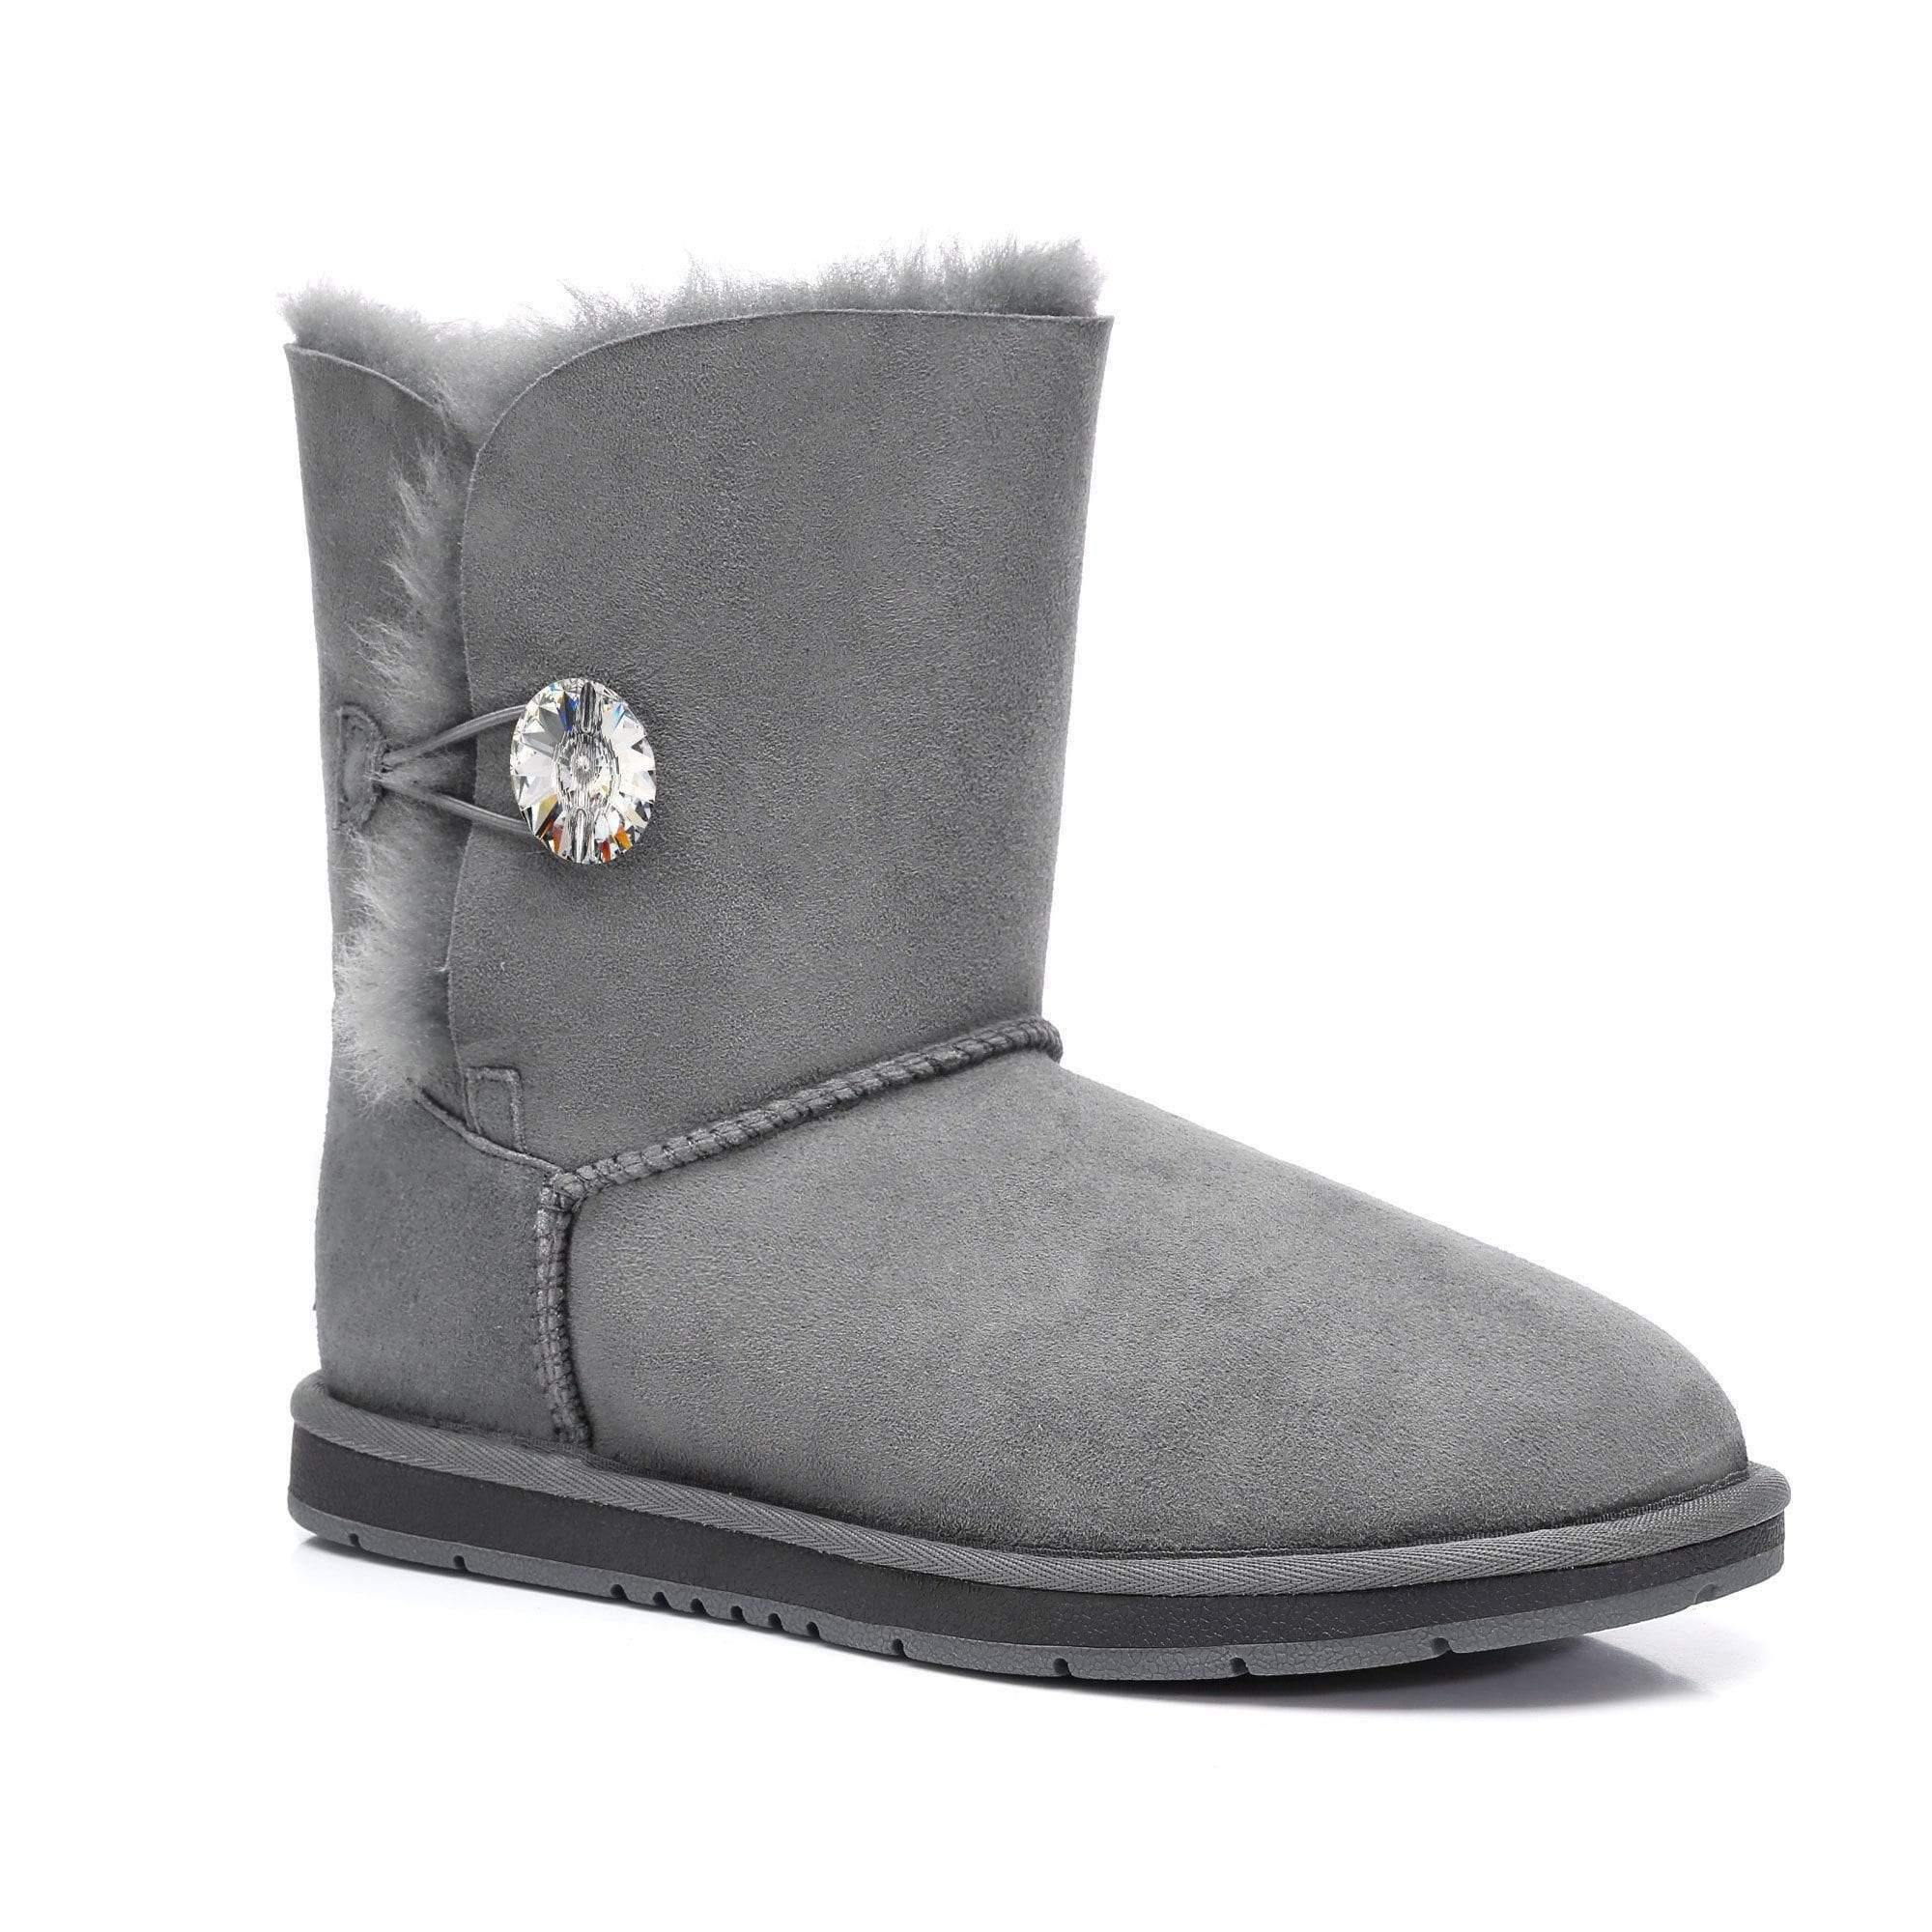 ugg boots with button